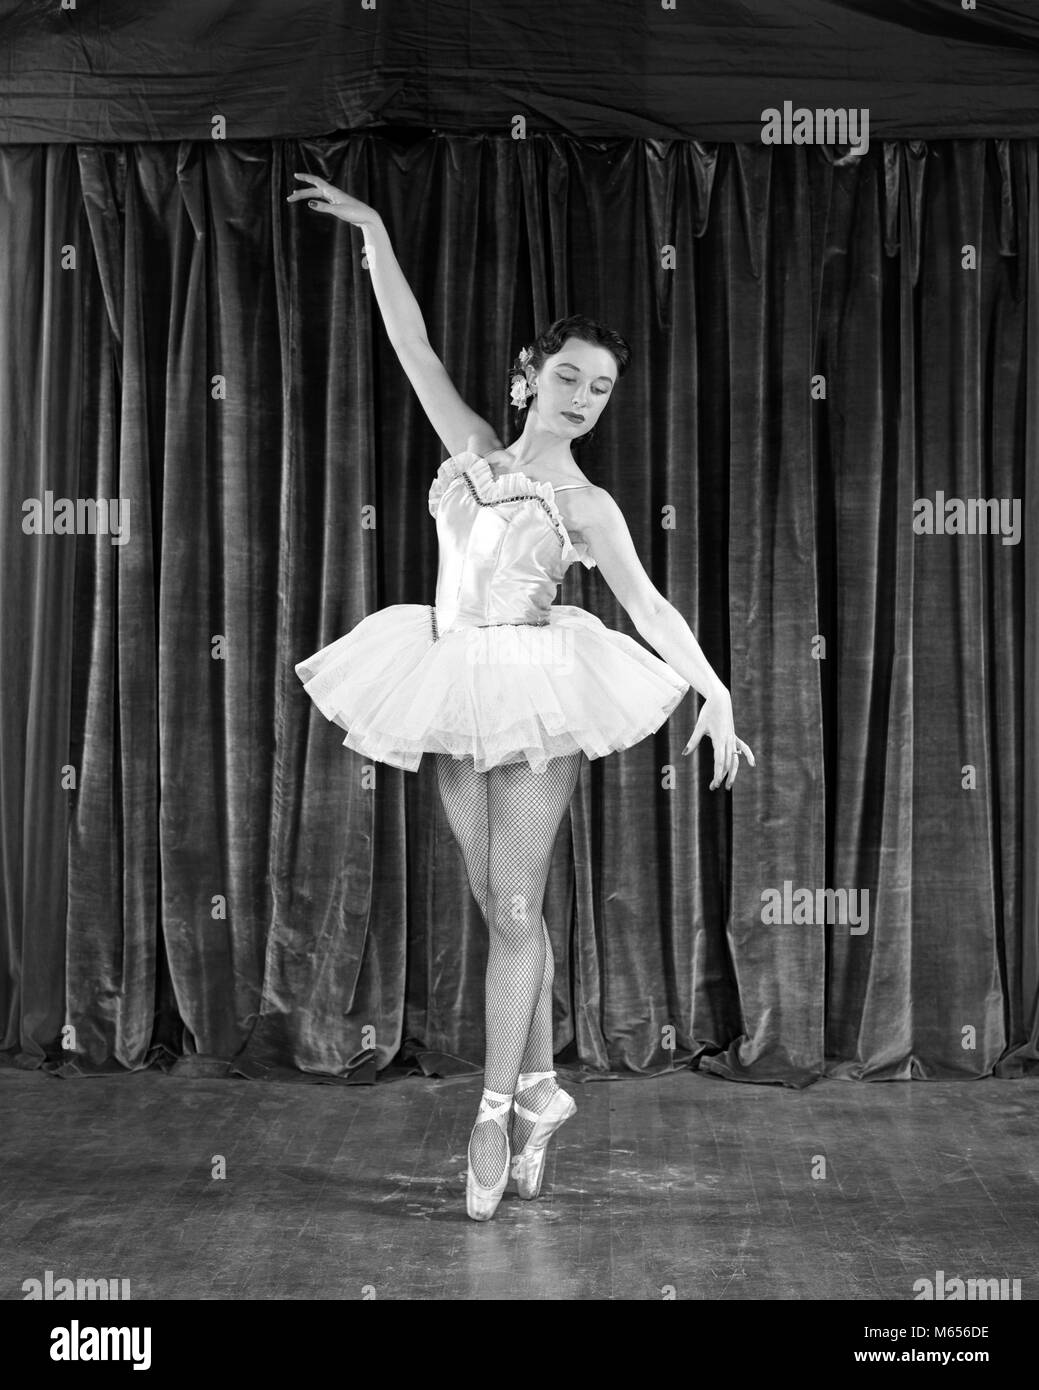 1950s BRUNETTE BALLERINA IN CLASSICAL POSE ON POINTE BEFORE CURTAIN ON  STAGE - d2459 HAR001 HARS BRUNETTE PERFORMING ARTS BEFORE OCCUPATION  PERFORMER CAREERS TUTU 18-19 YEARS BALLERINA ENTERTAINER ACTORS PERFORMERS  SLIPPER ENTERTAINERS